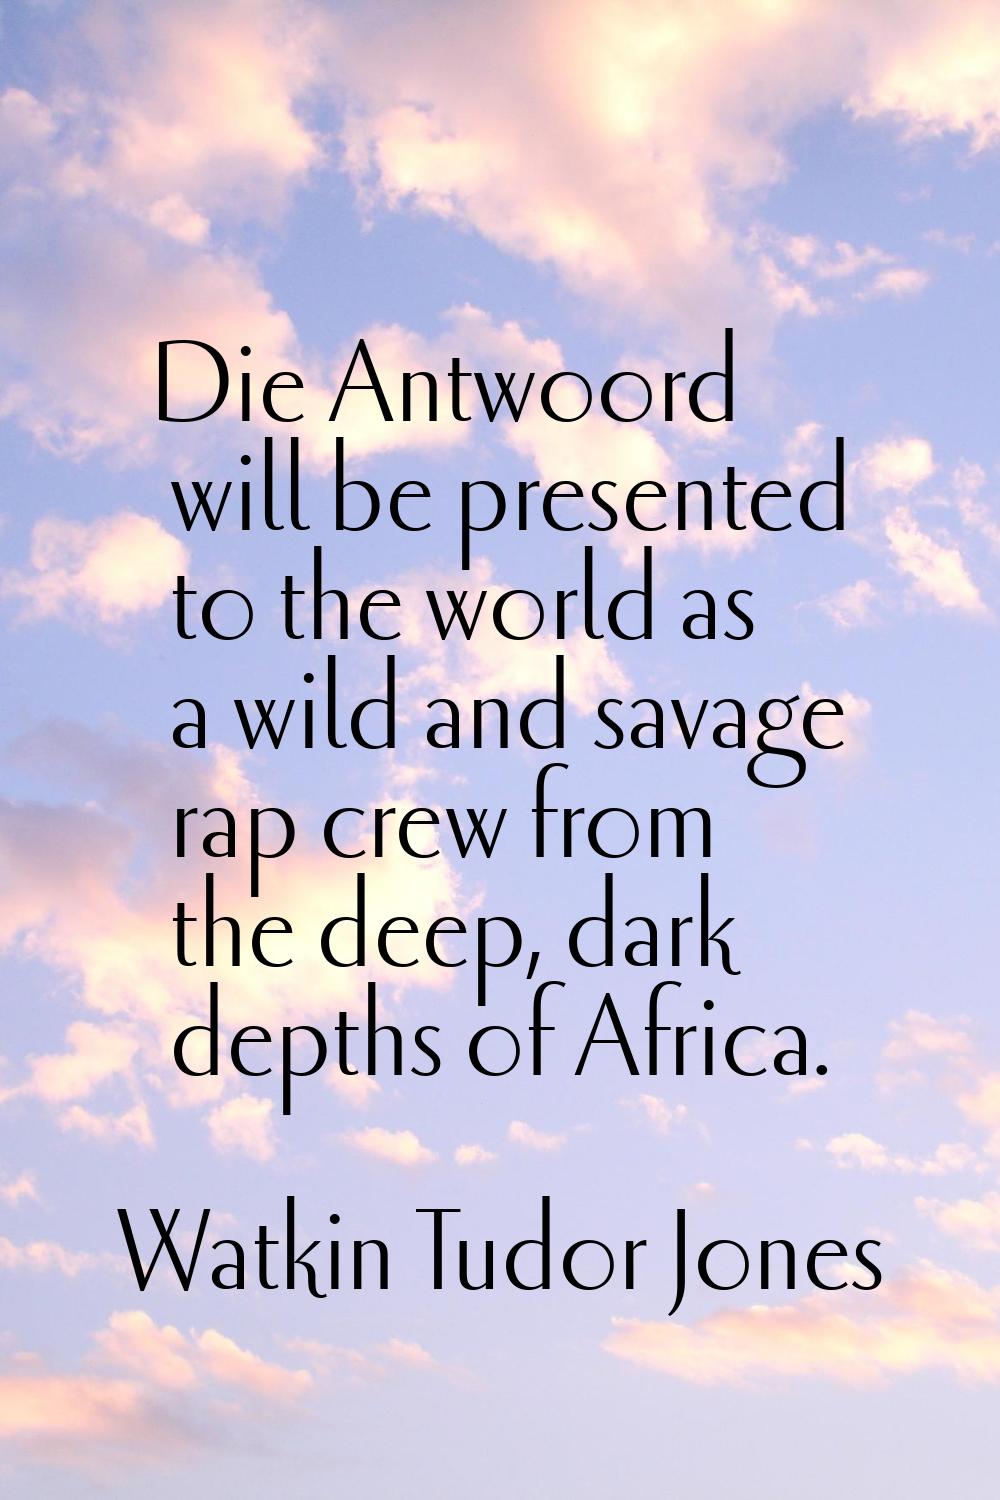 Die Antwoord will be presented to the world as a wild and savage rap crew from the deep, dark depth